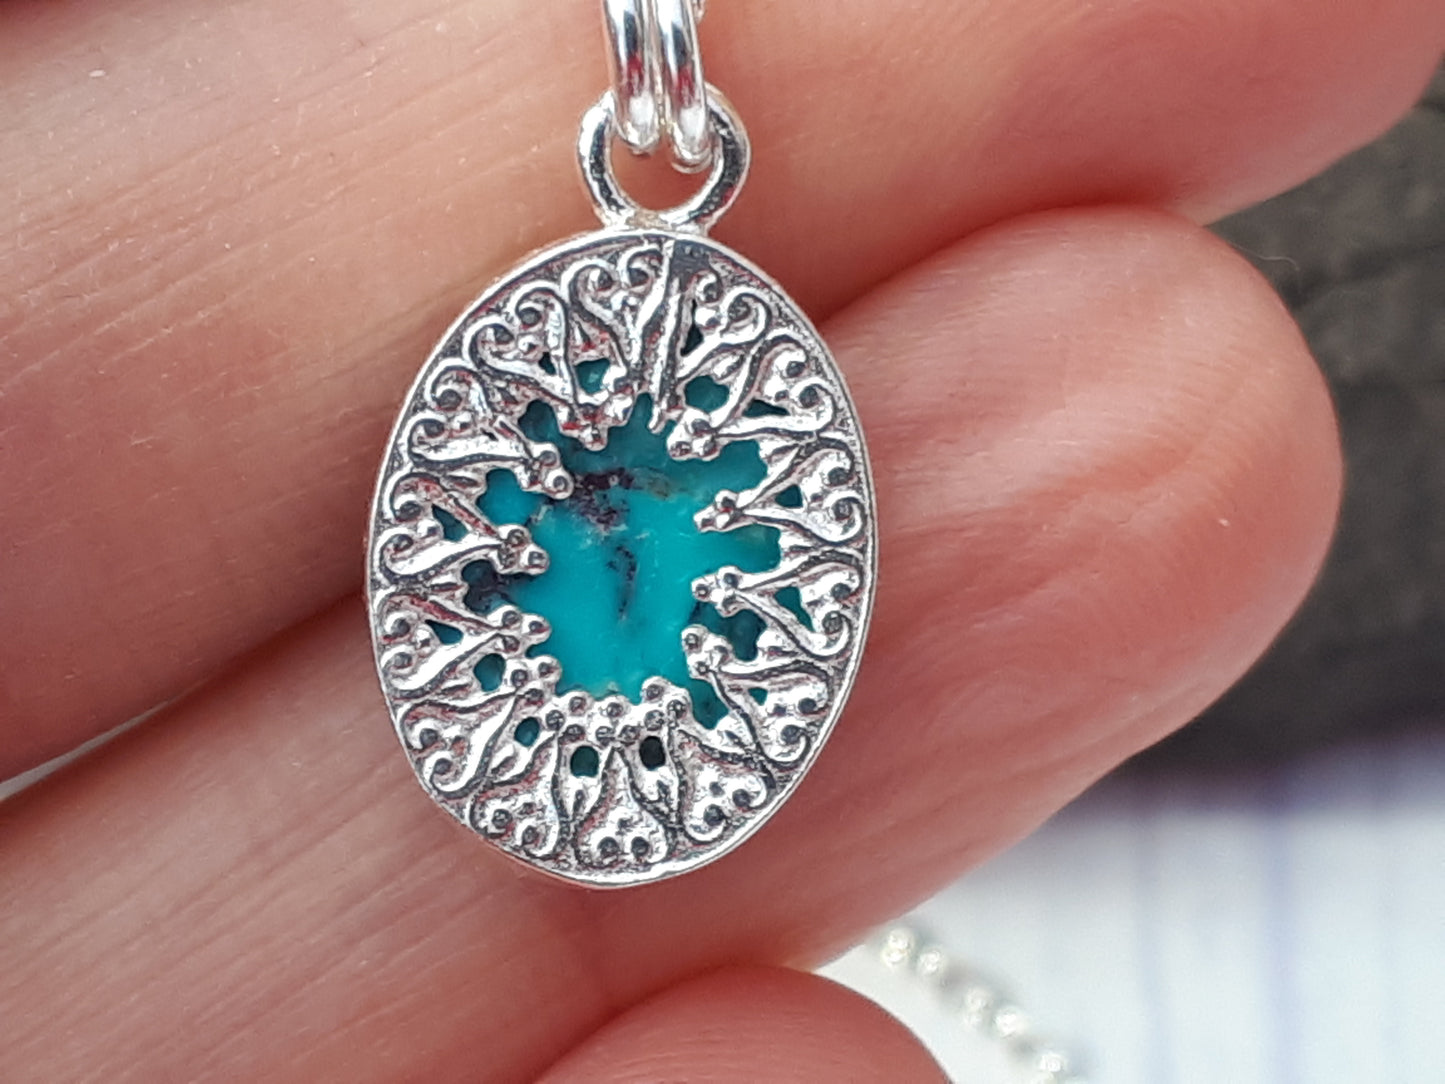 Turquoise pendant necklace in sterling silver.